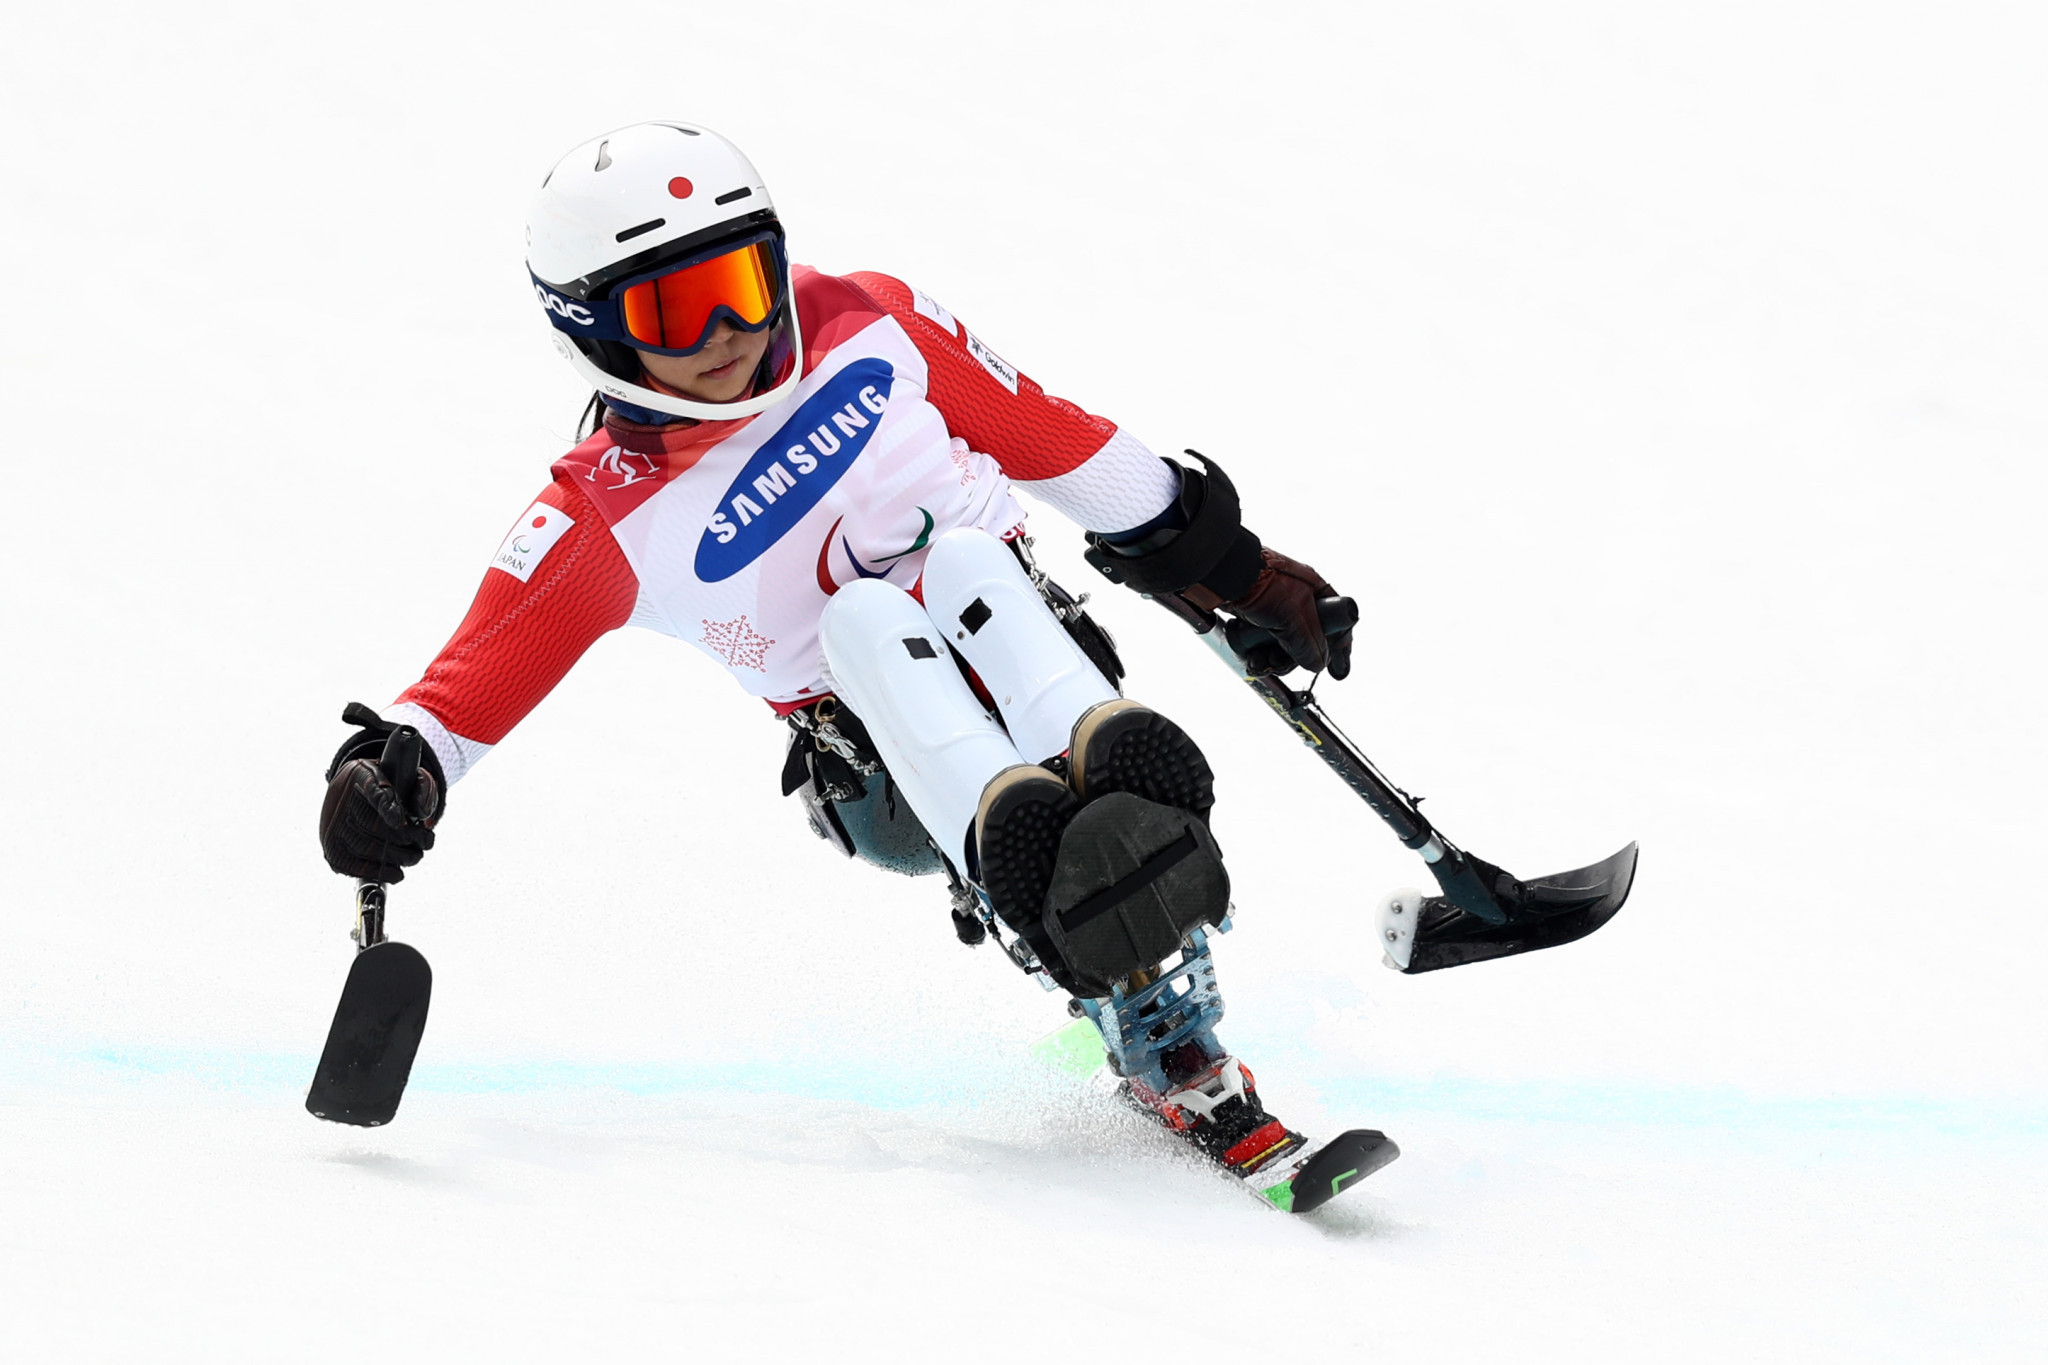 Bochet and Muraoka survive scares to take giant slalom wins at World Para Alpine Skiing World Cup